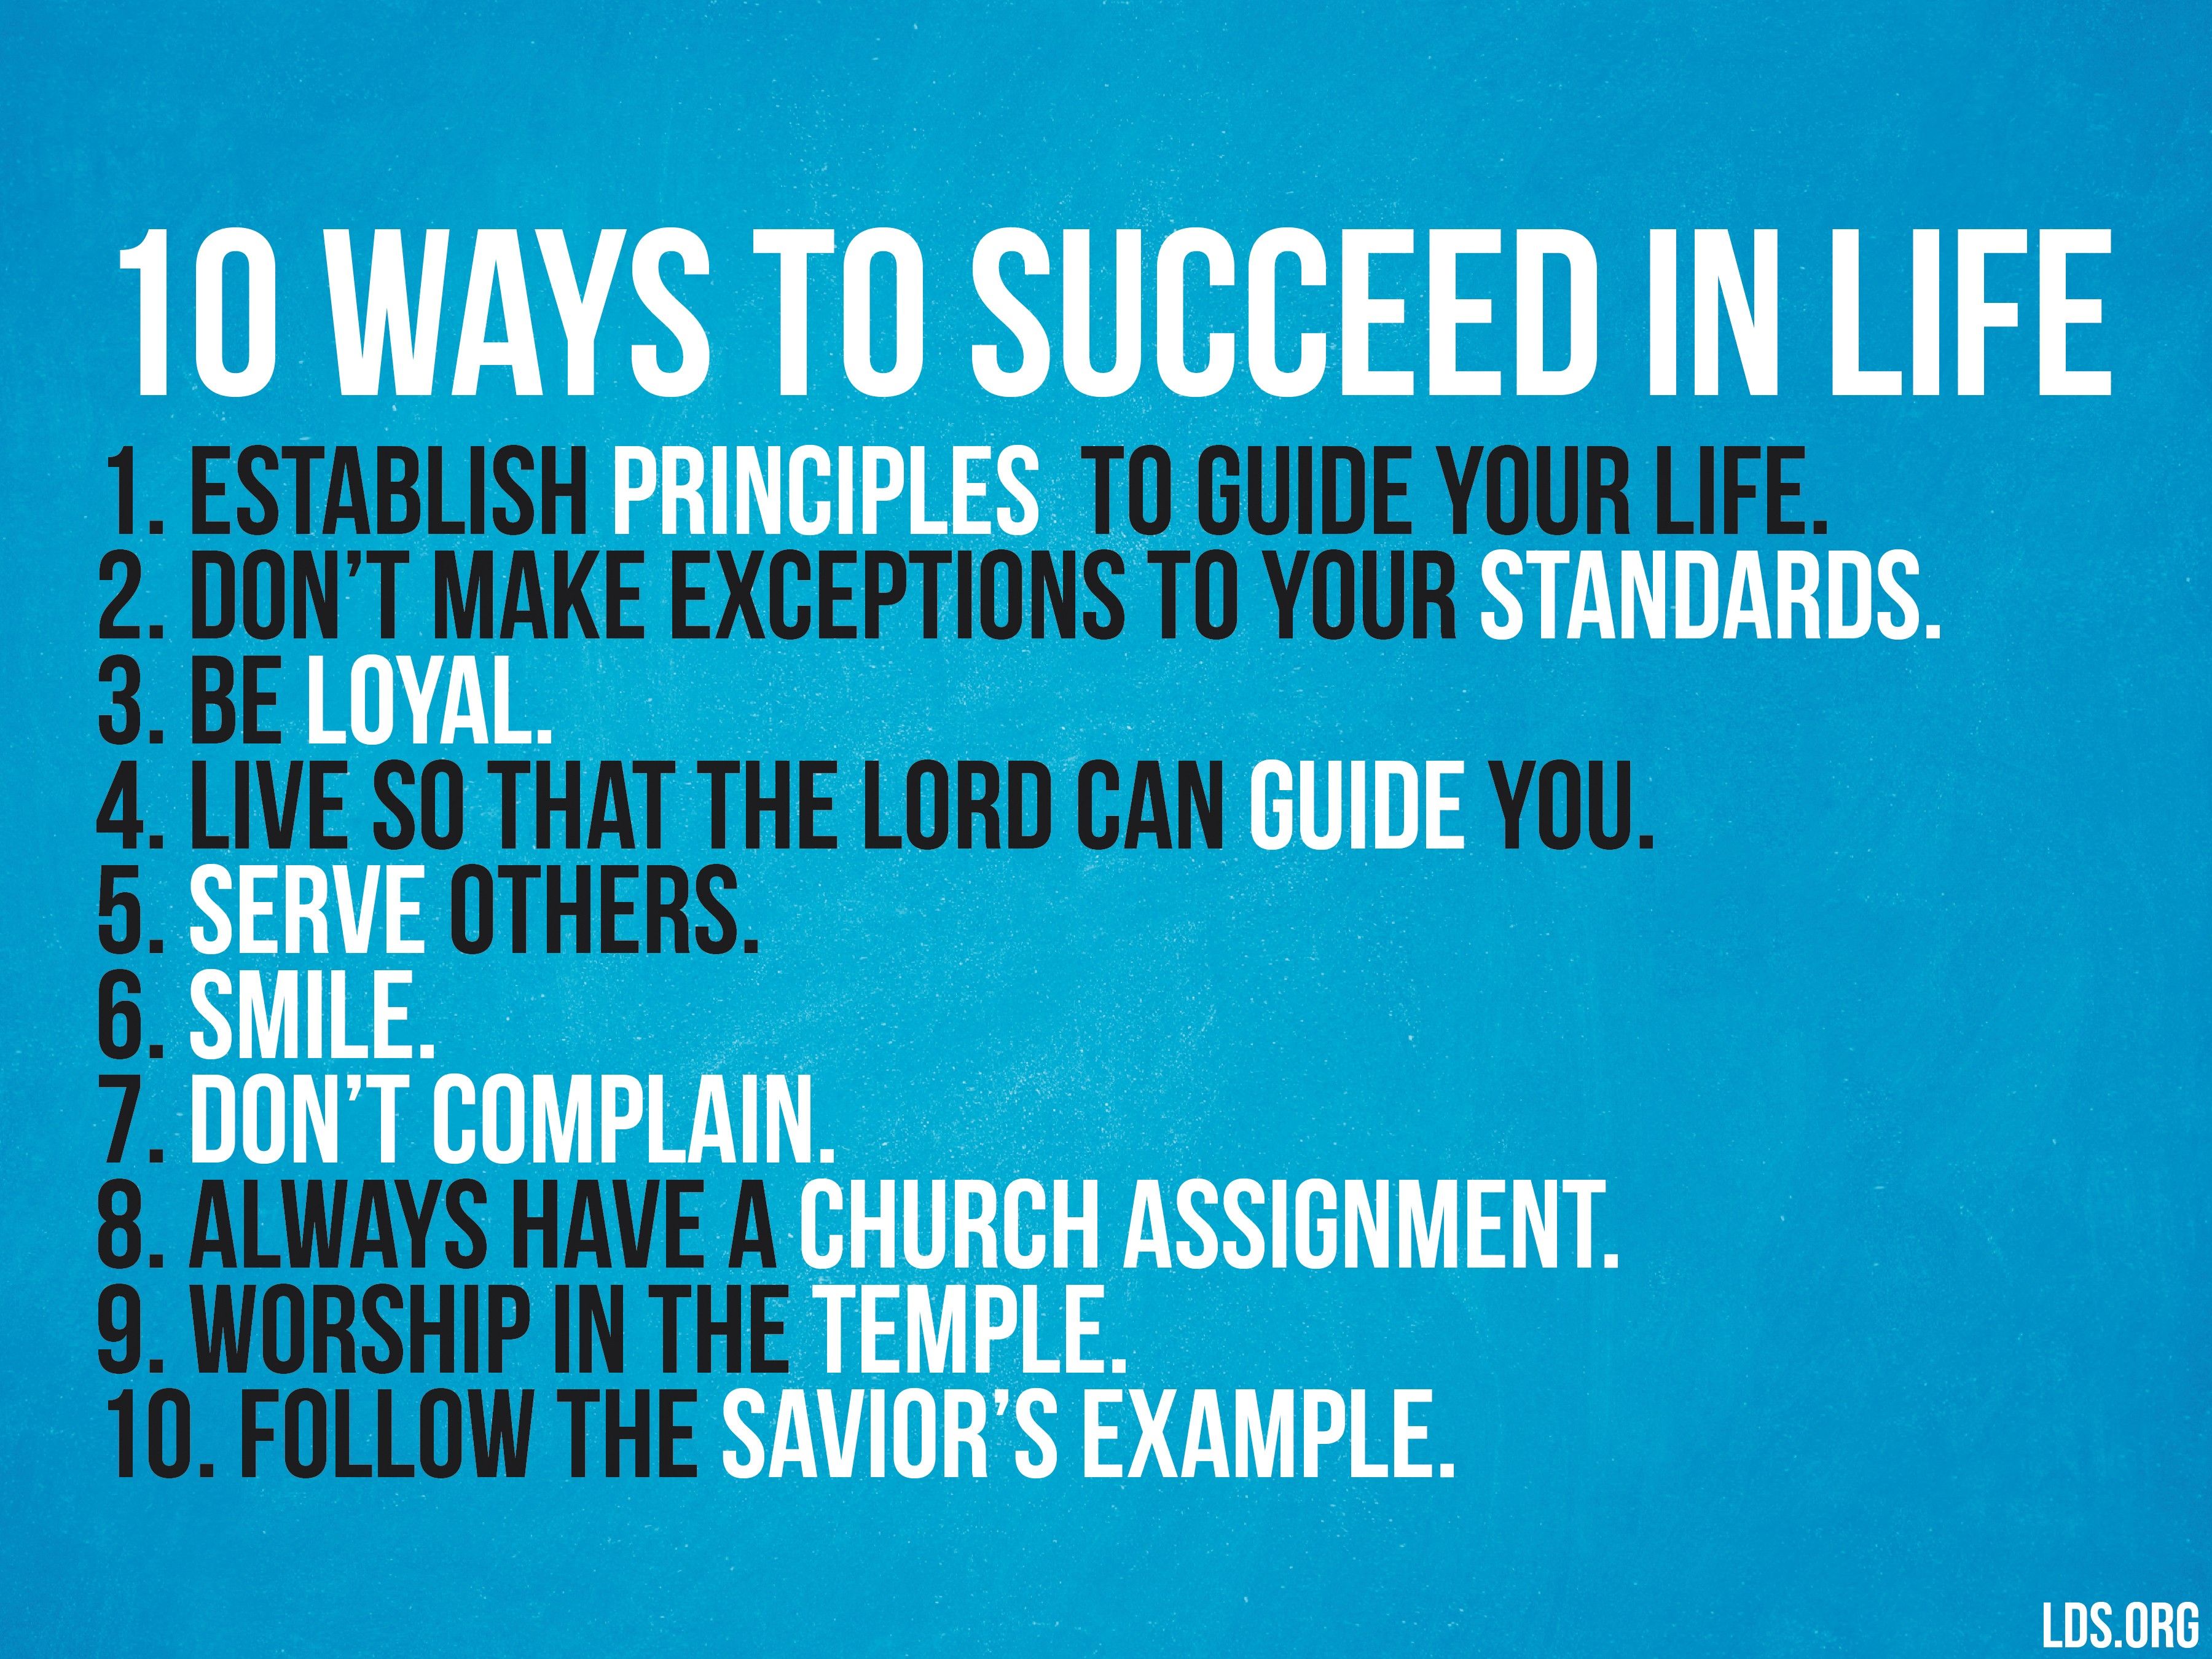 10 ways to succeed in life: “1. Establish principles to guide your life. 2. Don't make exceptions to your standards. 3. Be loyal. 4. Live so that the Lord can guide you. 5. Serve others. 6. Smile. 7. Don't complain. 8. Always have a Church assignment. 9. Worship in the temple. 10. Follow the Savior’s example.”—Elder Richard G. Scott, “Living a Life of Peace, Joy, and Purpose”